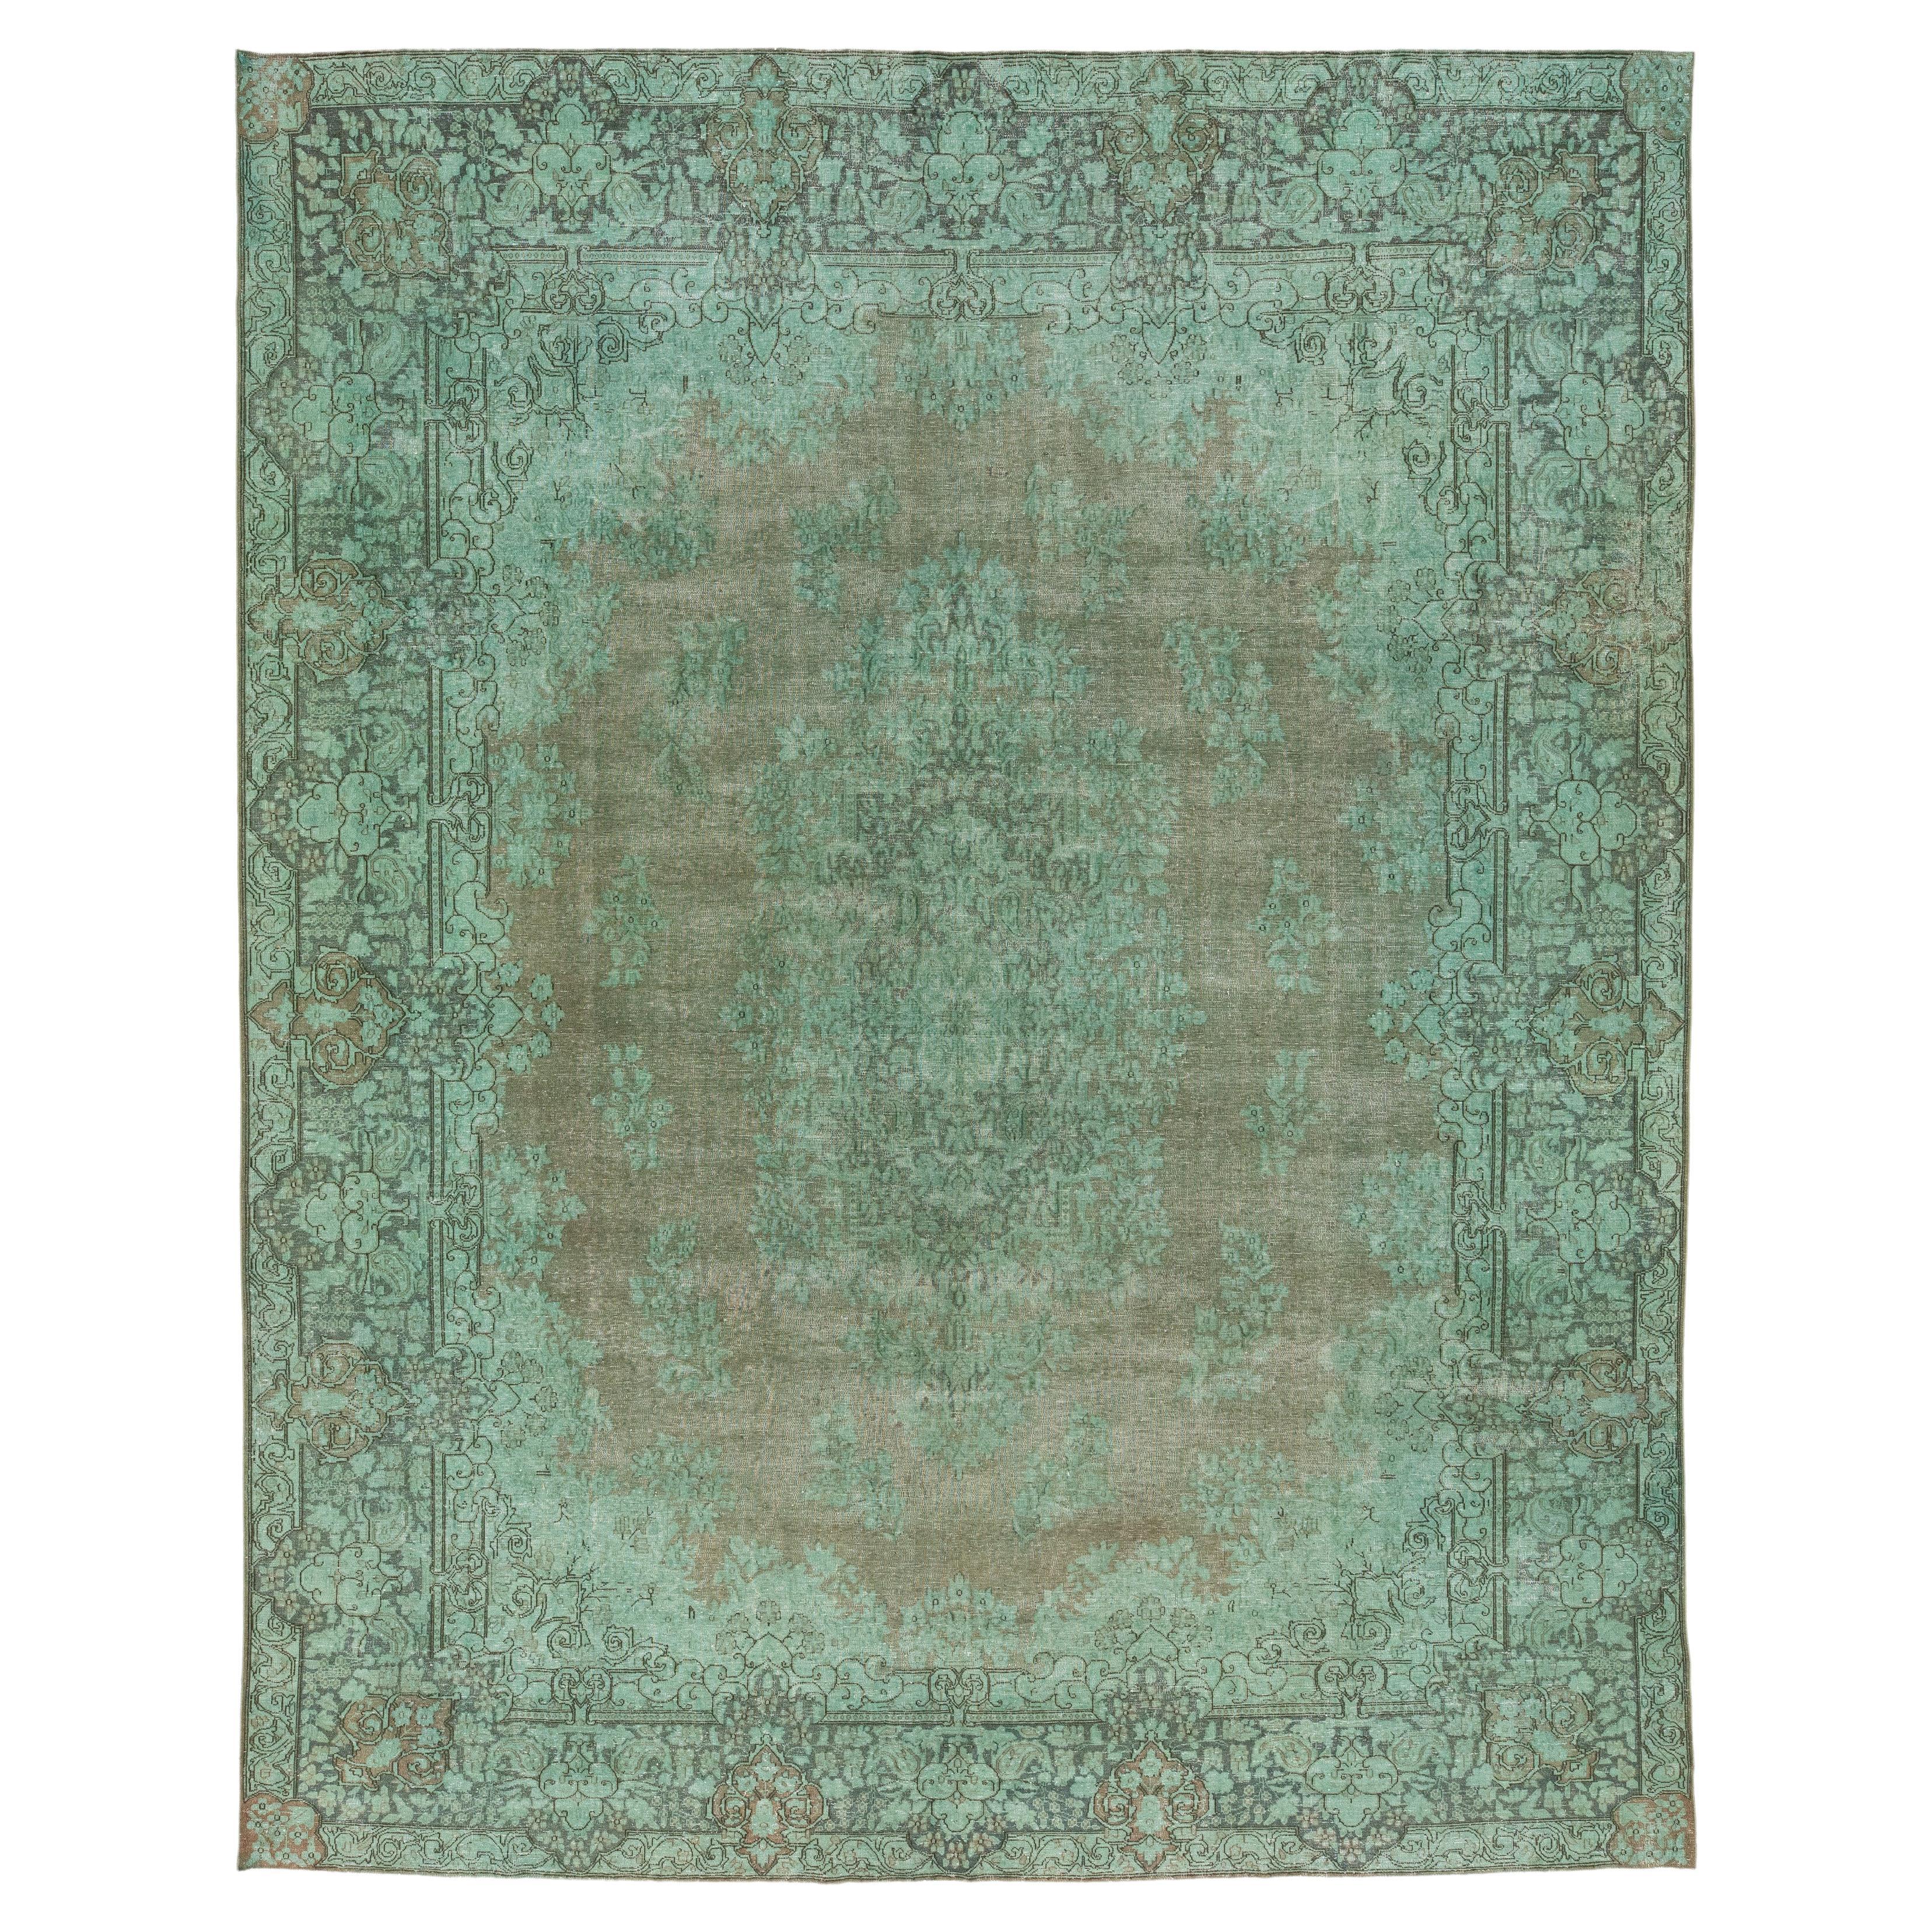 Green Floral Antique Persian Overdyed Wool Rug 10 x 13 For Sale